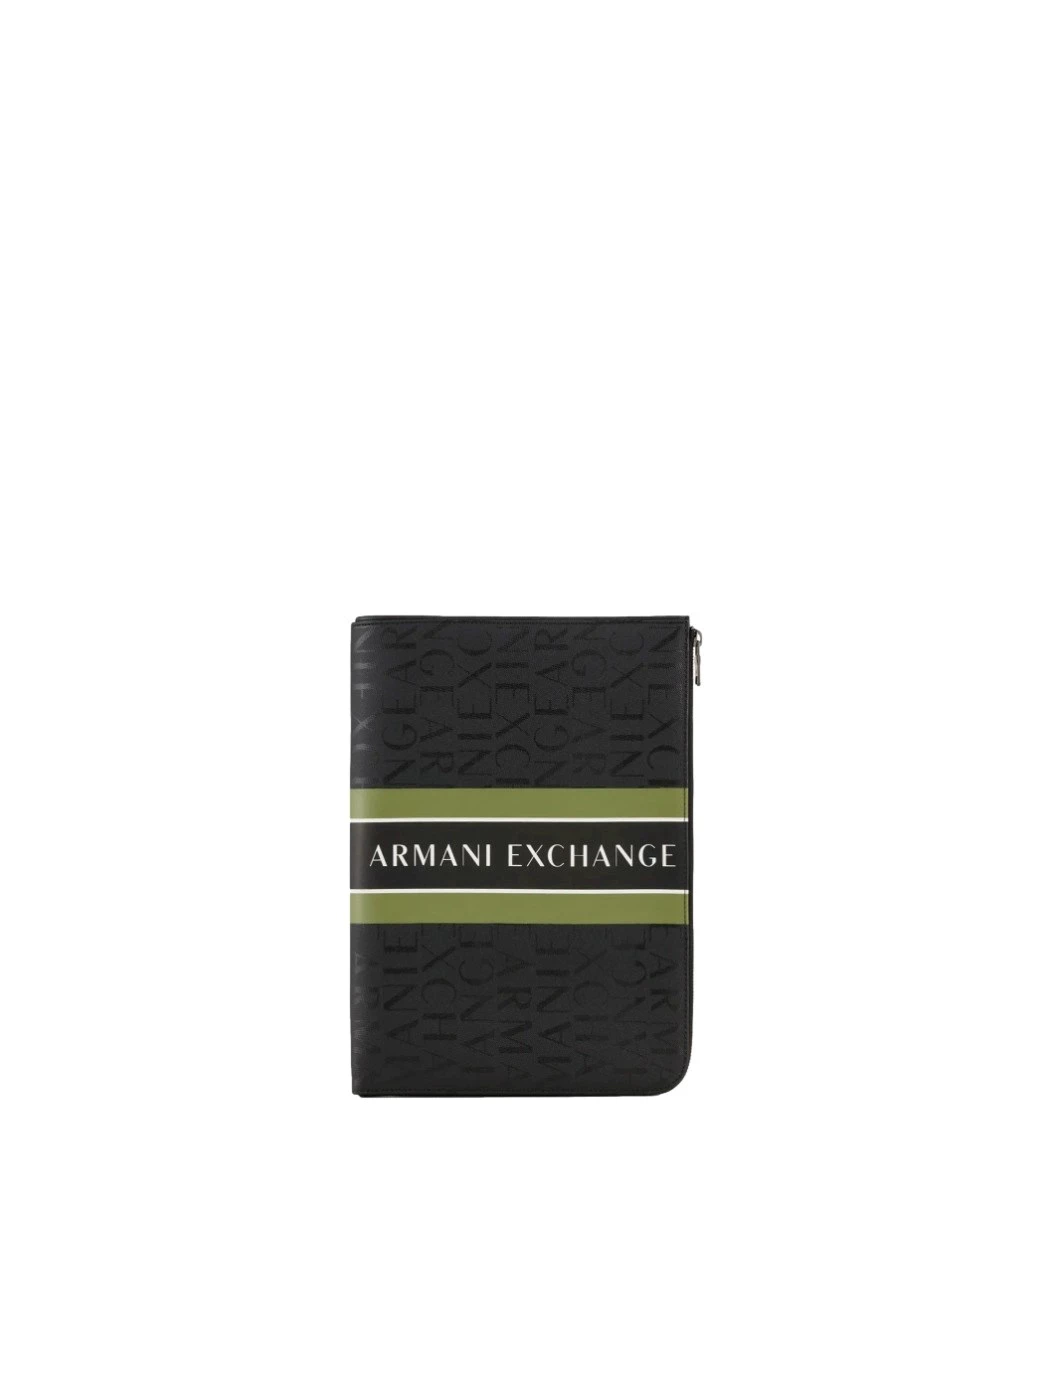 Carlutch bag with Armani Exchange all-over logo lettering